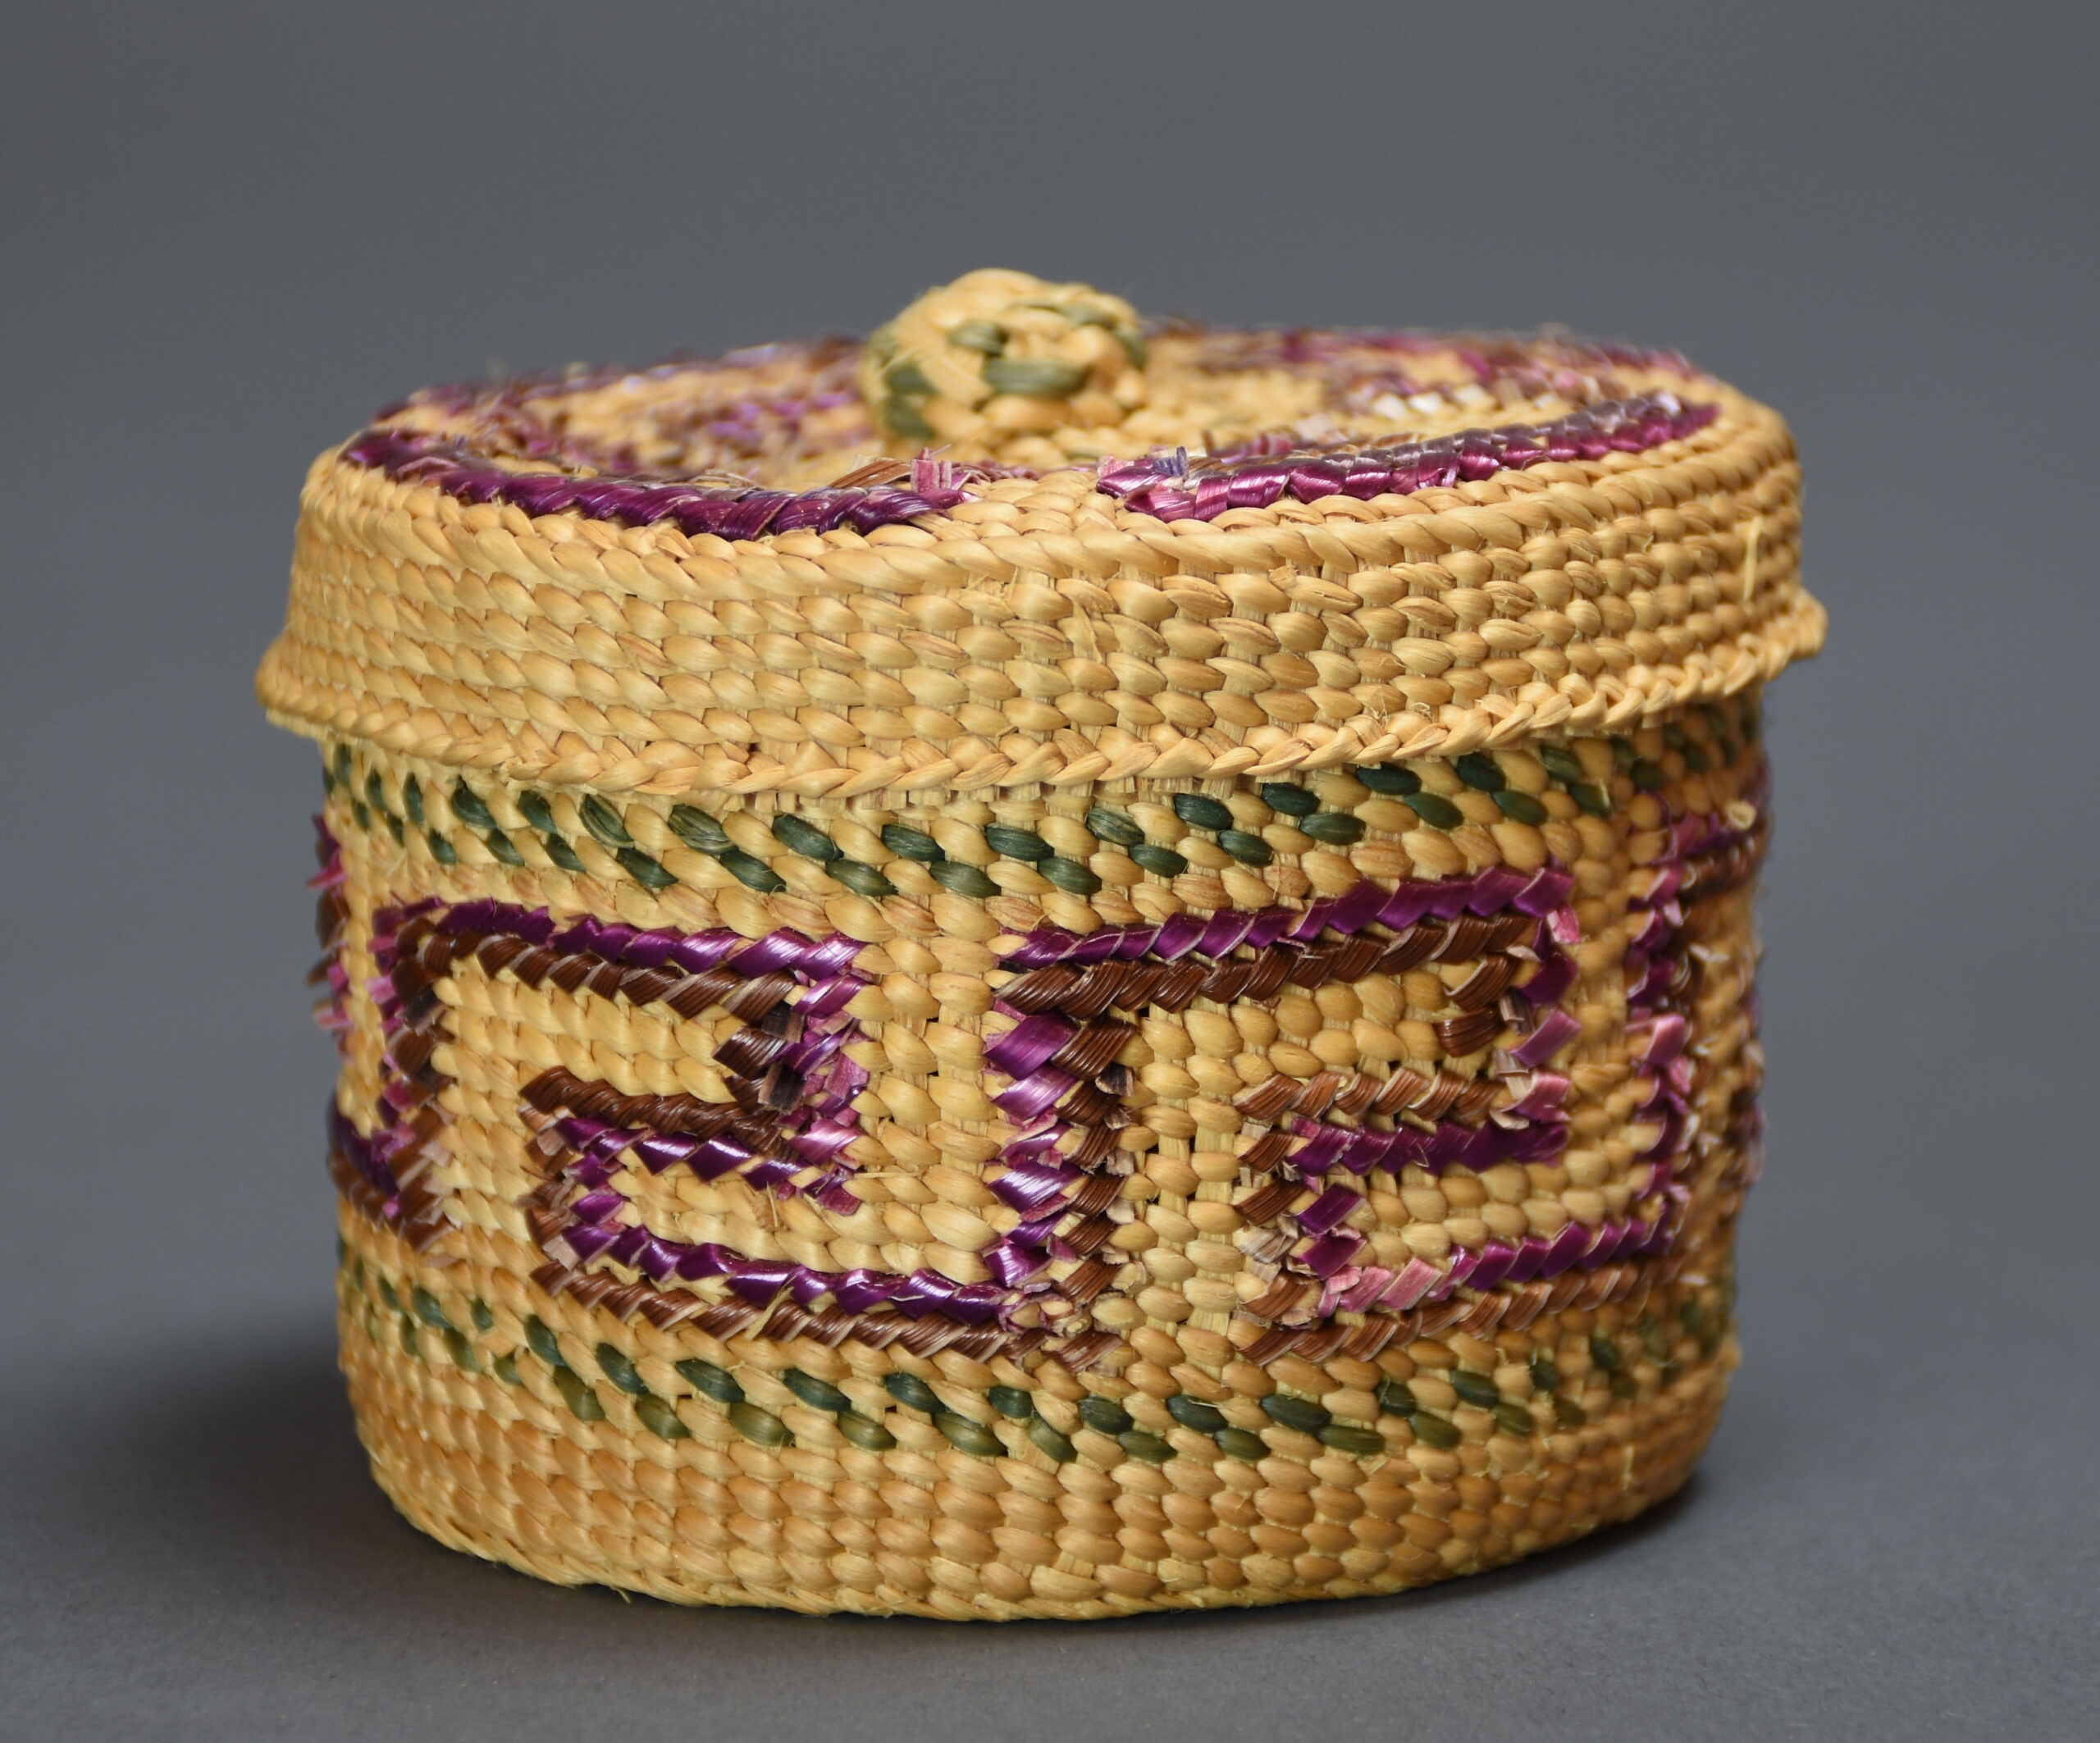 Selina Peratrovich, Haida, Kigw, Spruce Root Basket, 1977, twined spruce root basket with lid. Purple “cresting wave” design in false embroidery in center of basket flanked by two bands of “strawberry” design woven into the basket with green dyed spruce root (Ketchikan Museums: Tongass Historical Society Collection, THS 77.7.8.1 A&B)